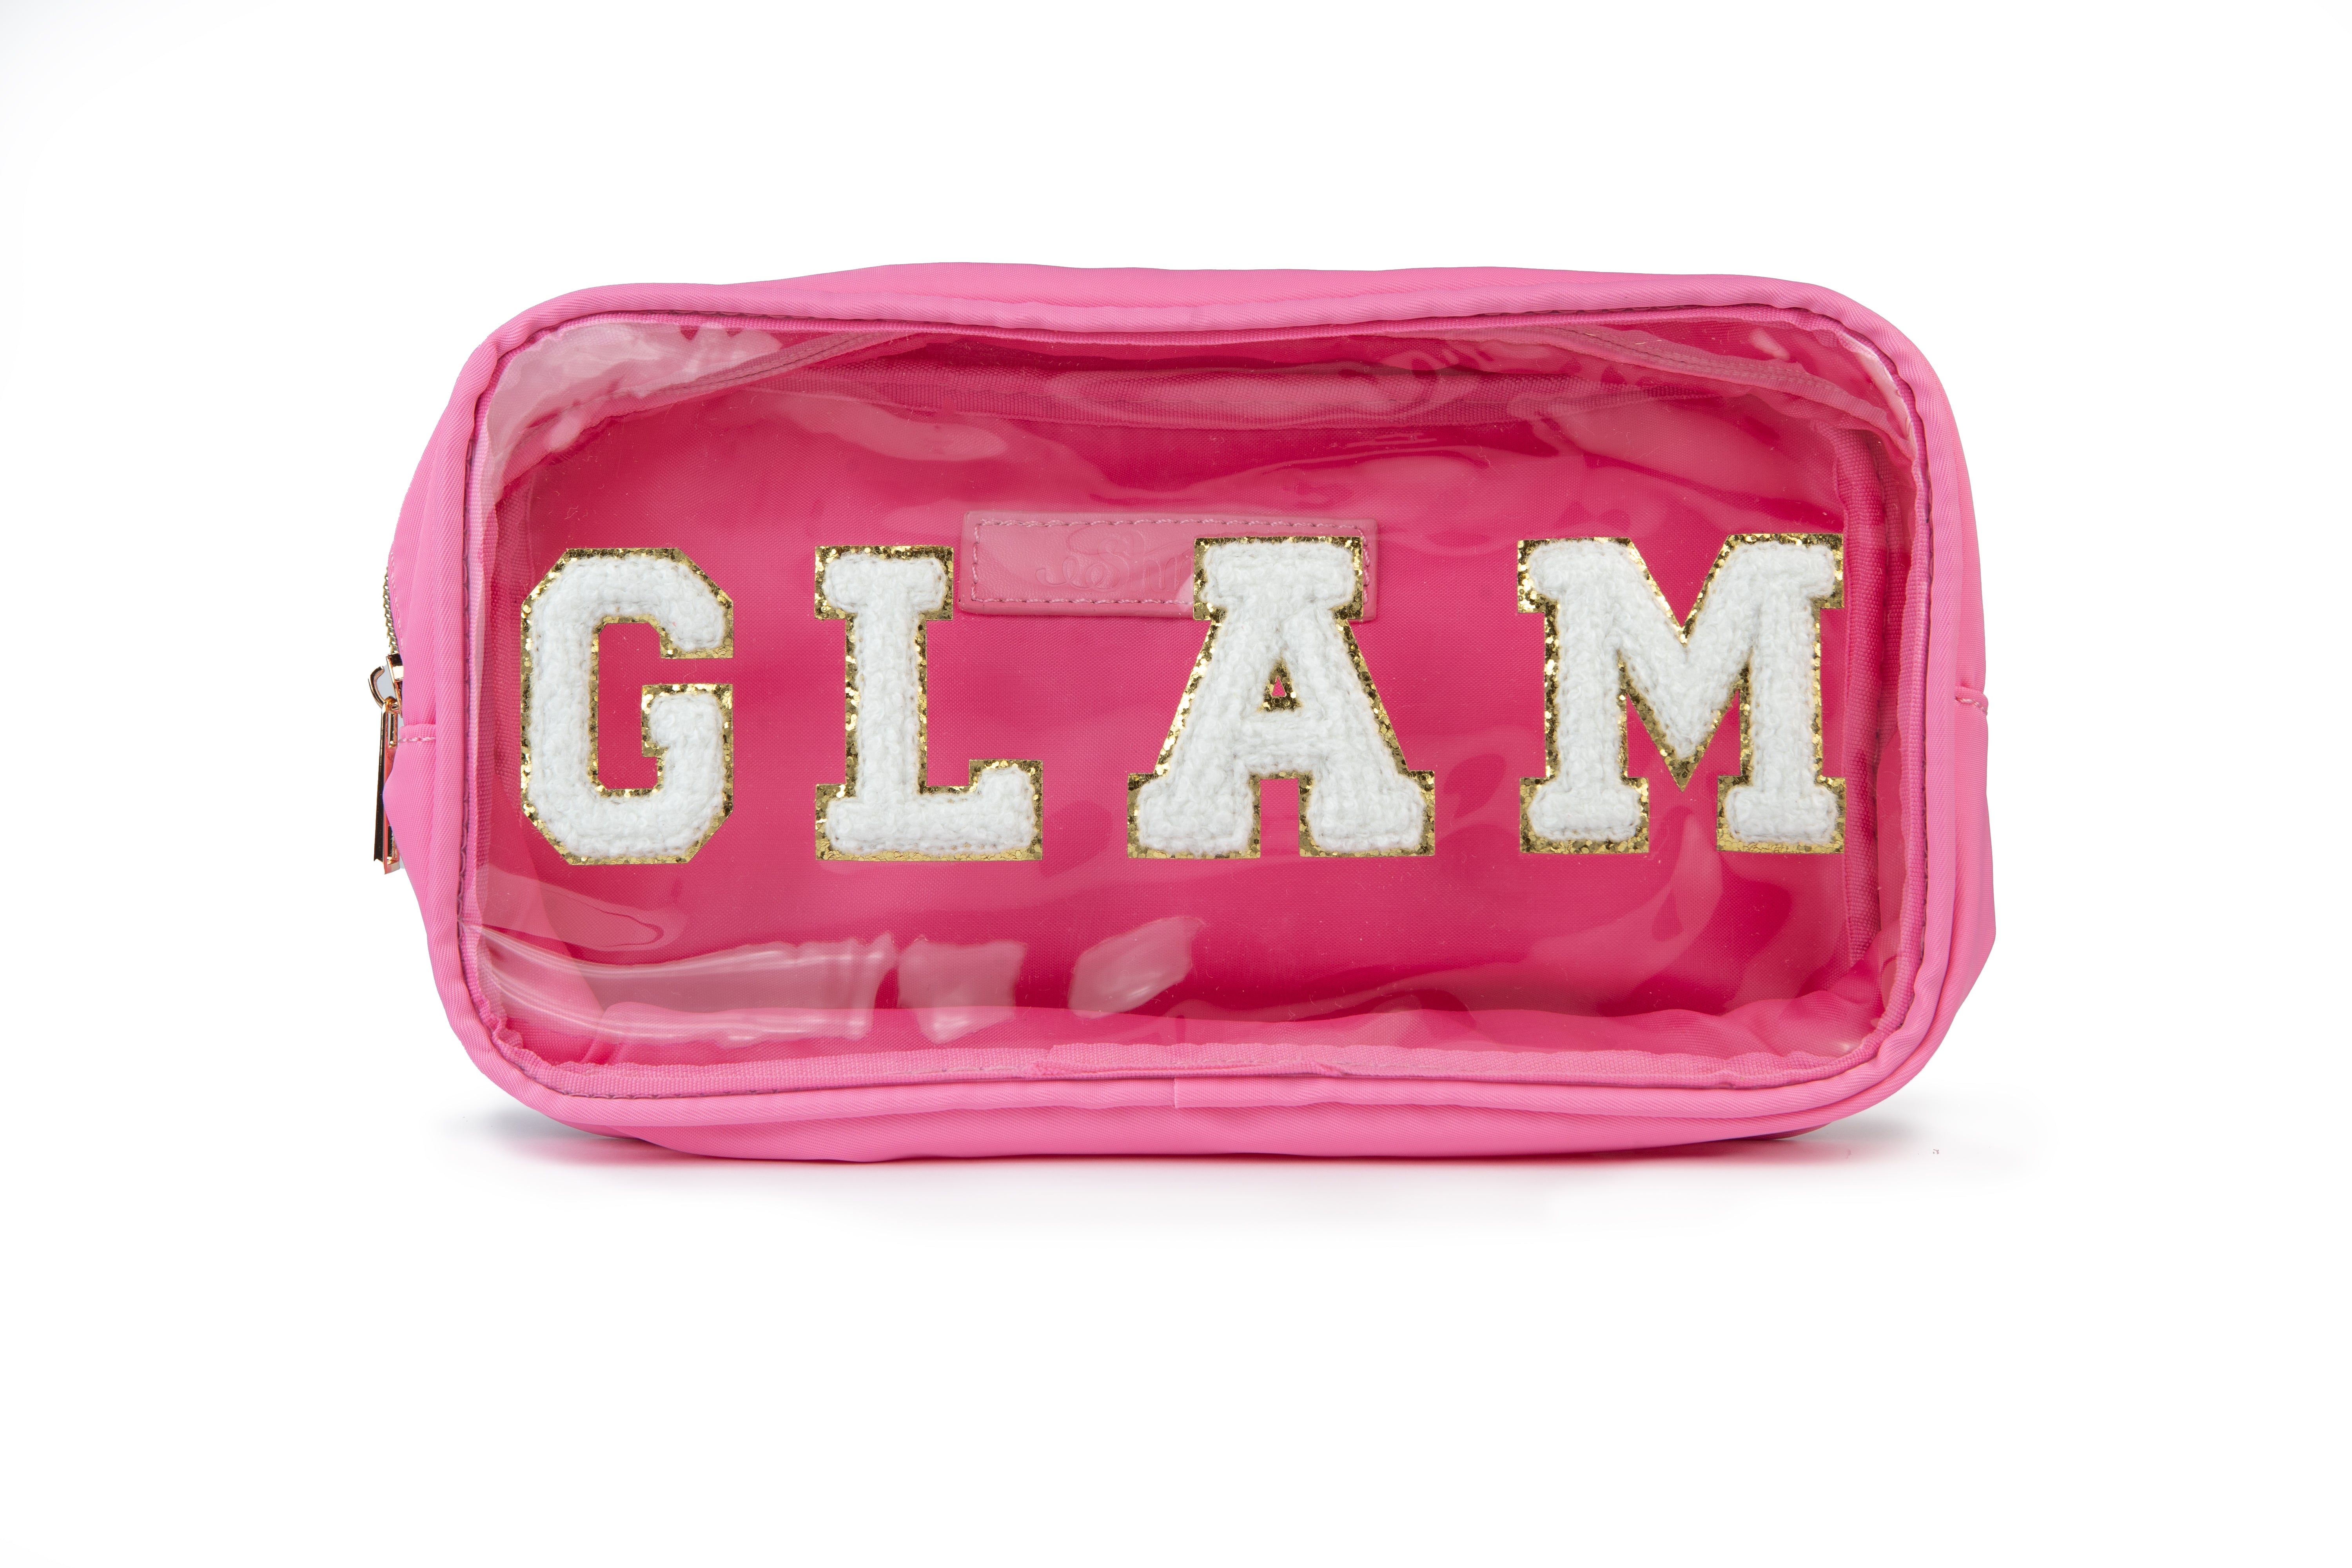 Glam Pouch in Pink